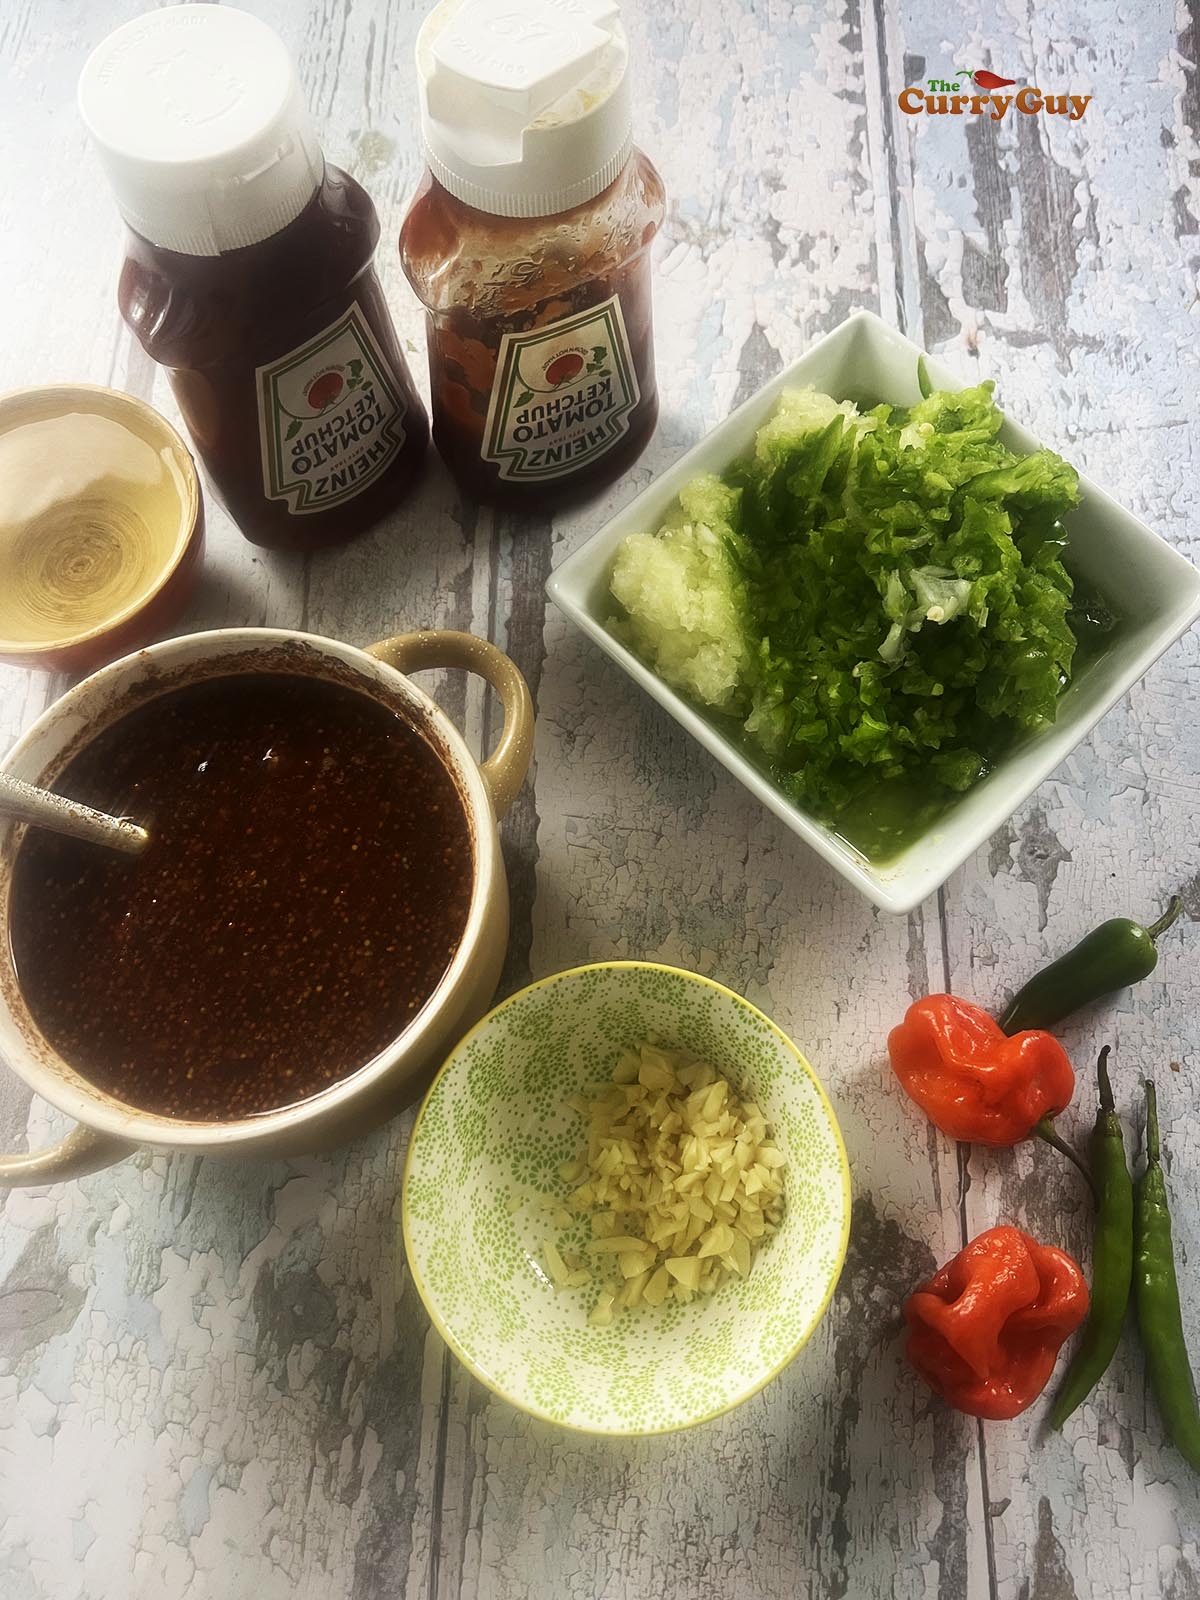 Ingredients for this barbecue sauce recipe